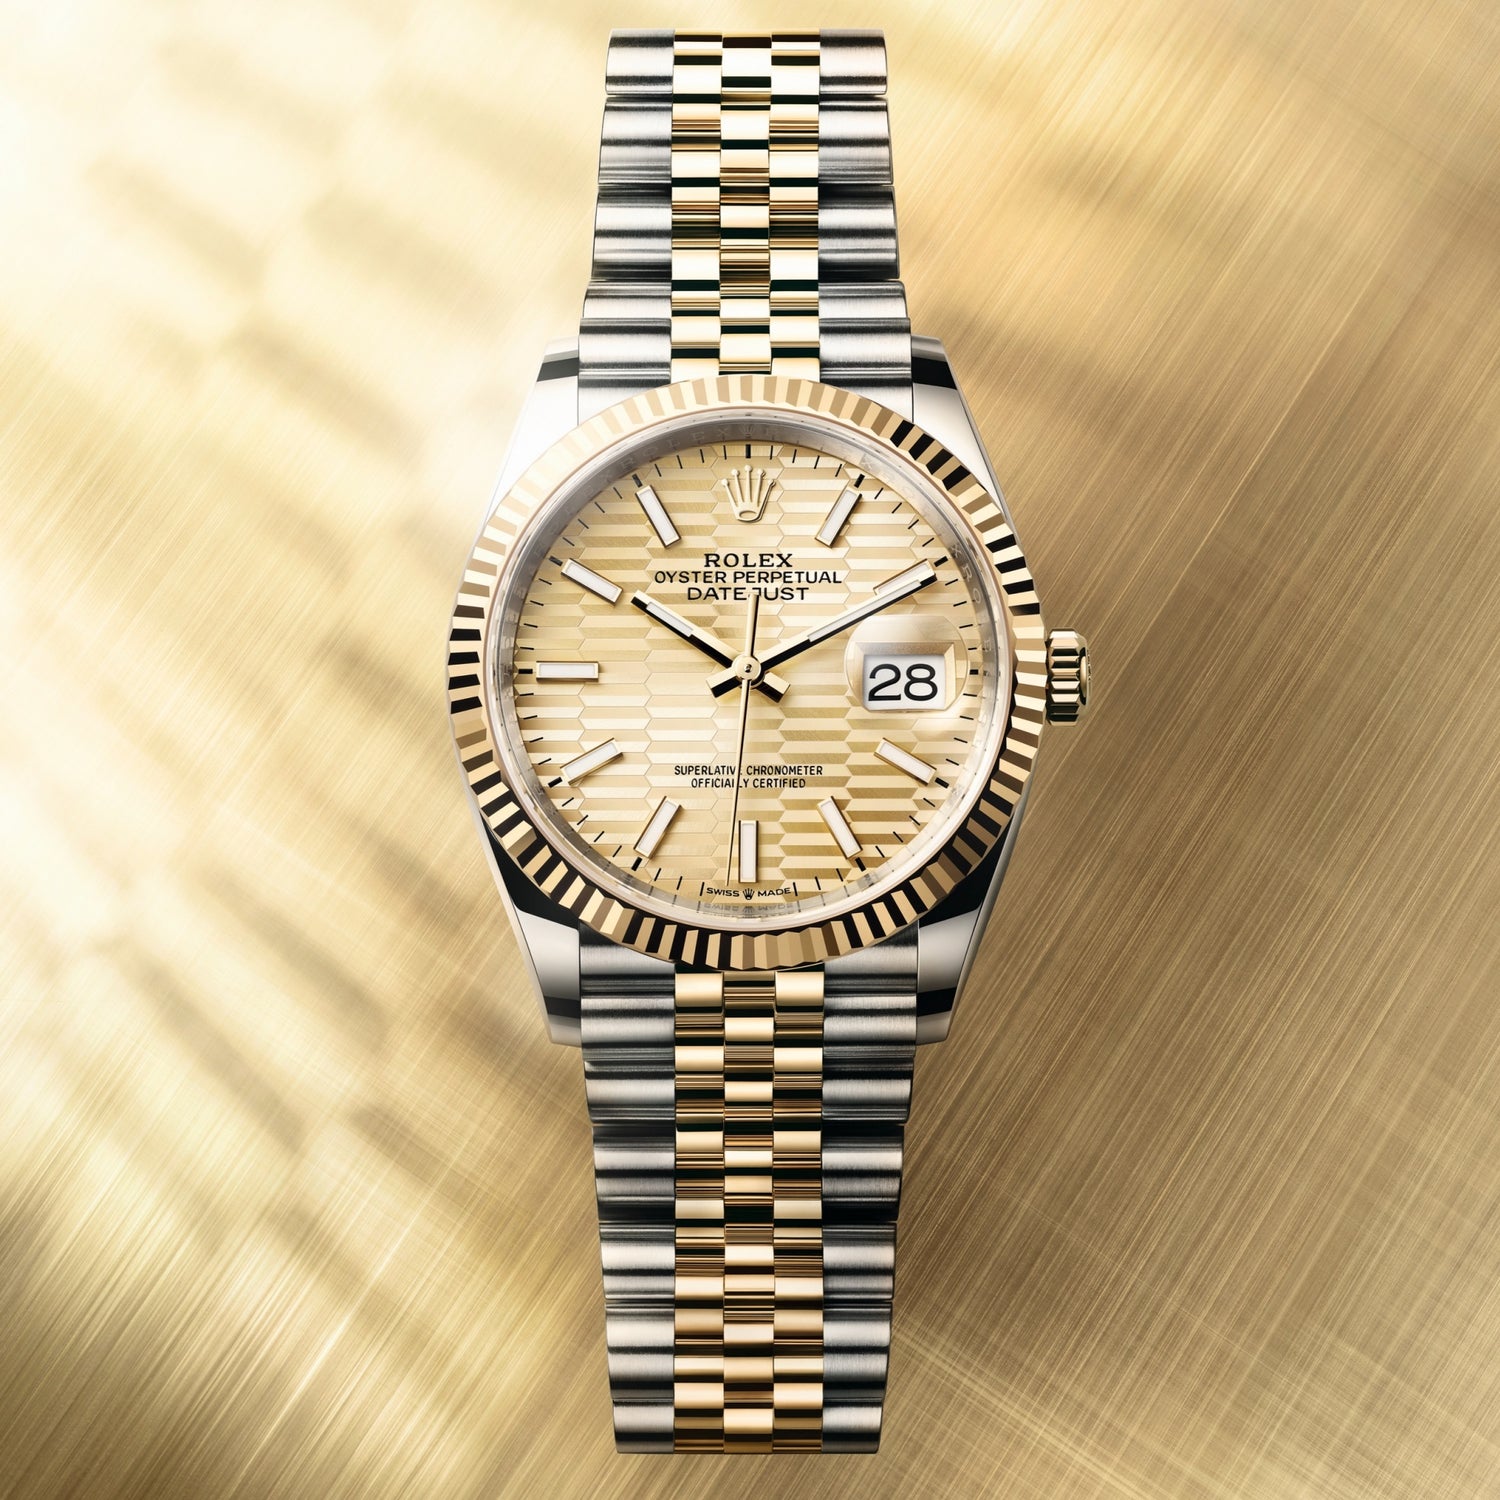 New Datejust 36 Fluted Motif Ref 126233 Watch in 2023